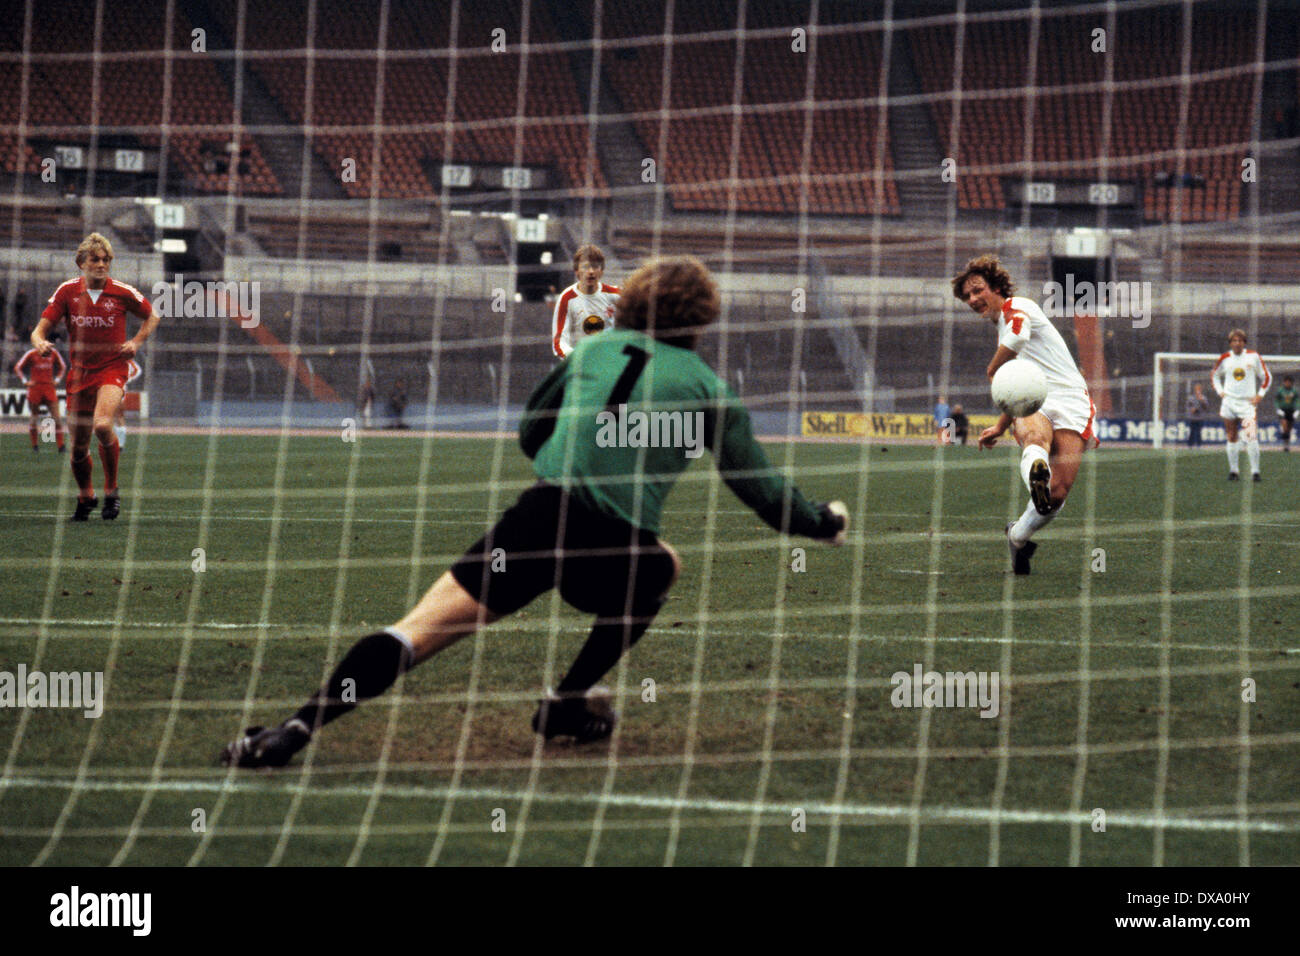 football, Bundesliga, 1981/1982, Rhine Stadium, Fortuna Duesseldorf versus 1. FC Kaiserslautern 4:2, scene of the match, Ruediger Wenzel (Fortuna) scores the 1:0 goal by penalty resulting from a foul, keeper Armin Reichel (FCK) is chanceless Stock Photo